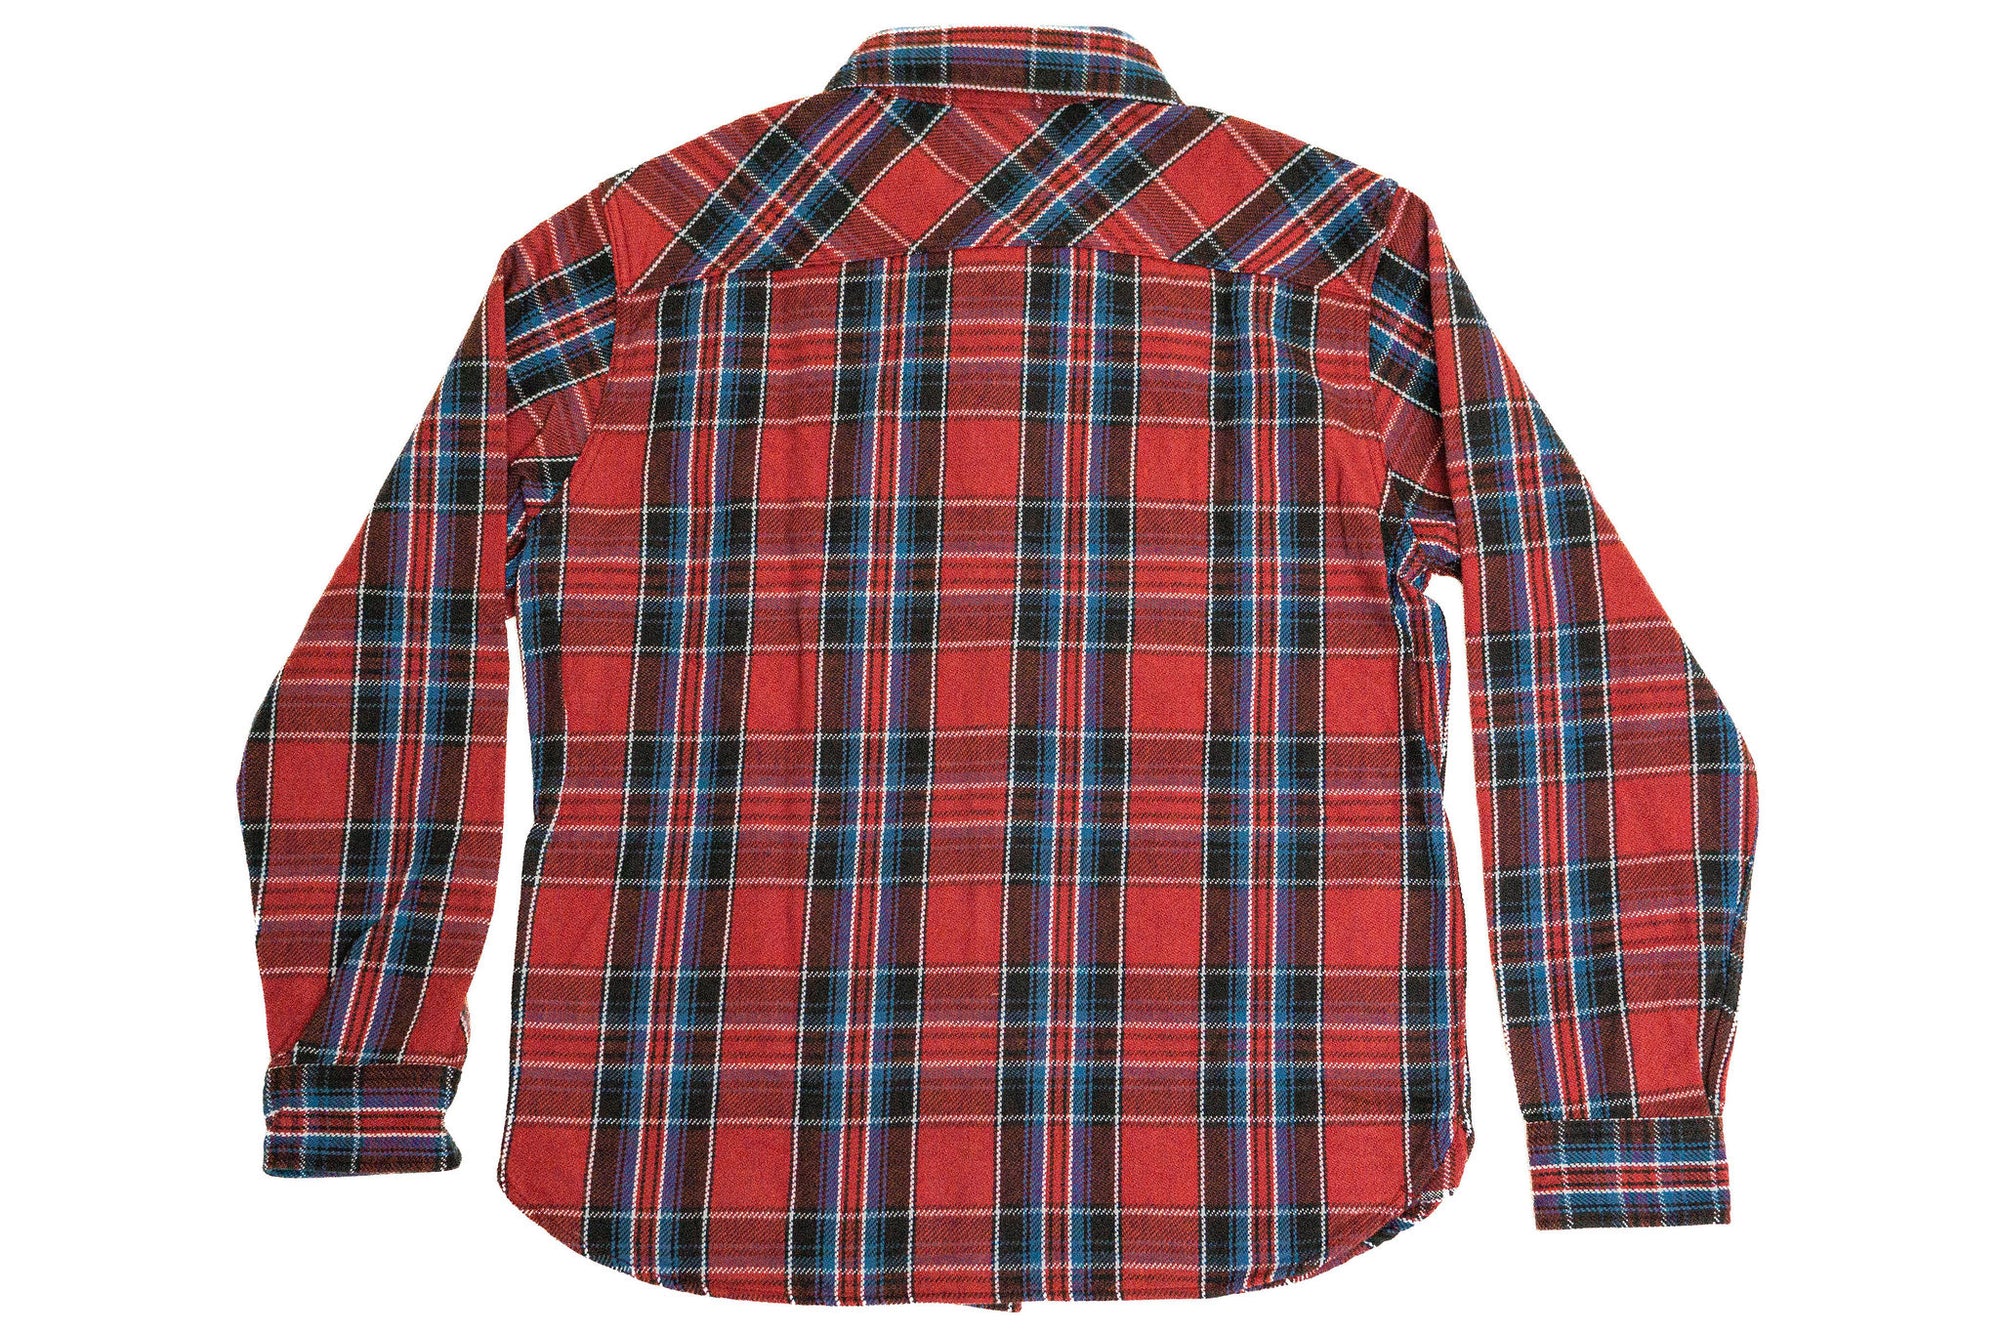 UES Heavy Flannel Shirt B-Type - Red - Franklin & Poe